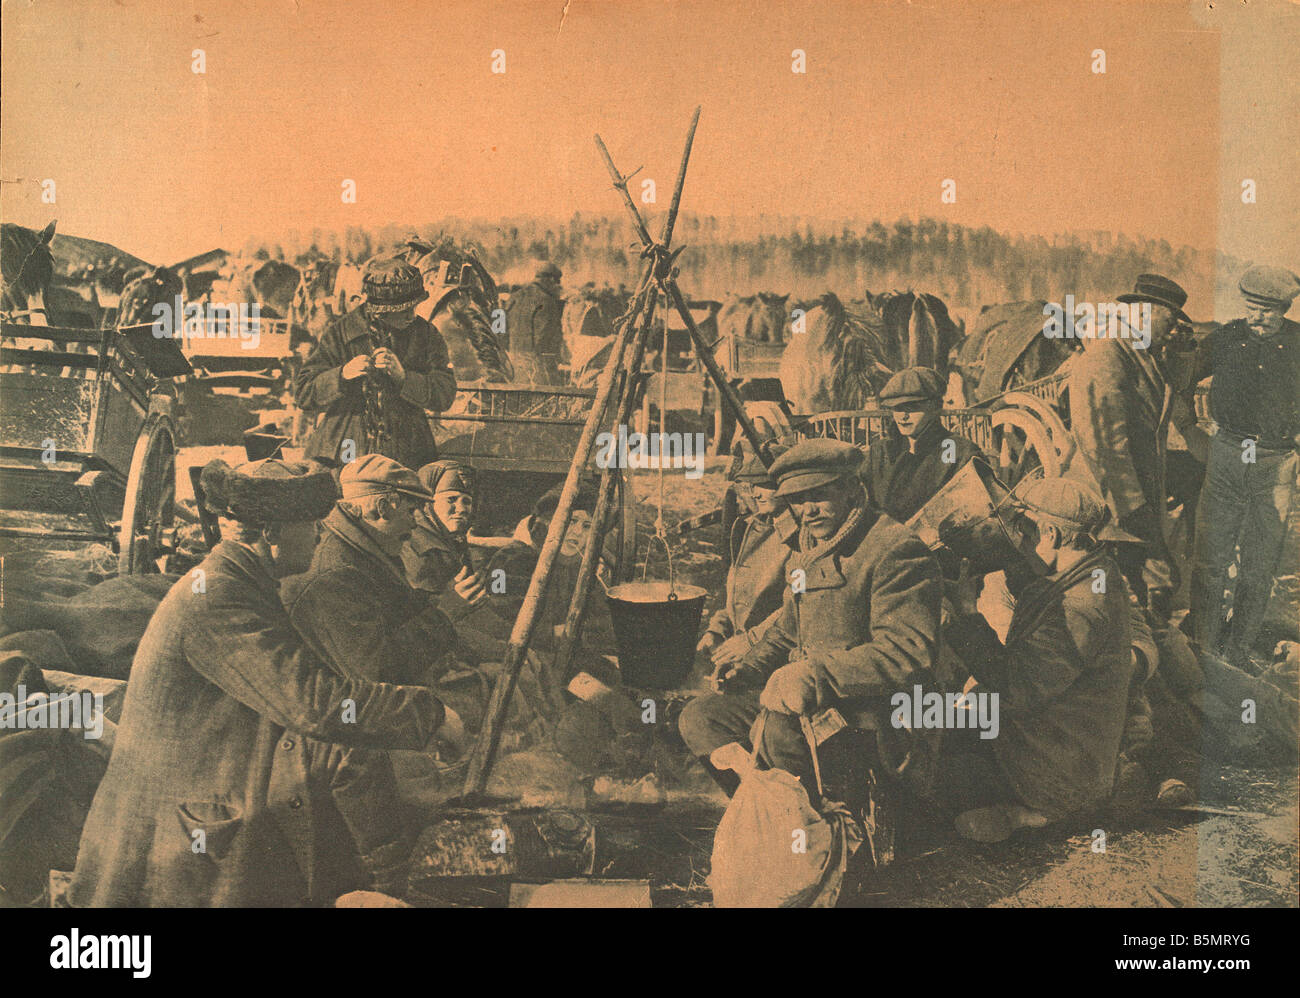 9FD 1918 4 0 A1 E Finland prisoners 1918 Photo Finland Battles between Communist Red Guards who demand Anschluss with Soviet Rus Stock Photo